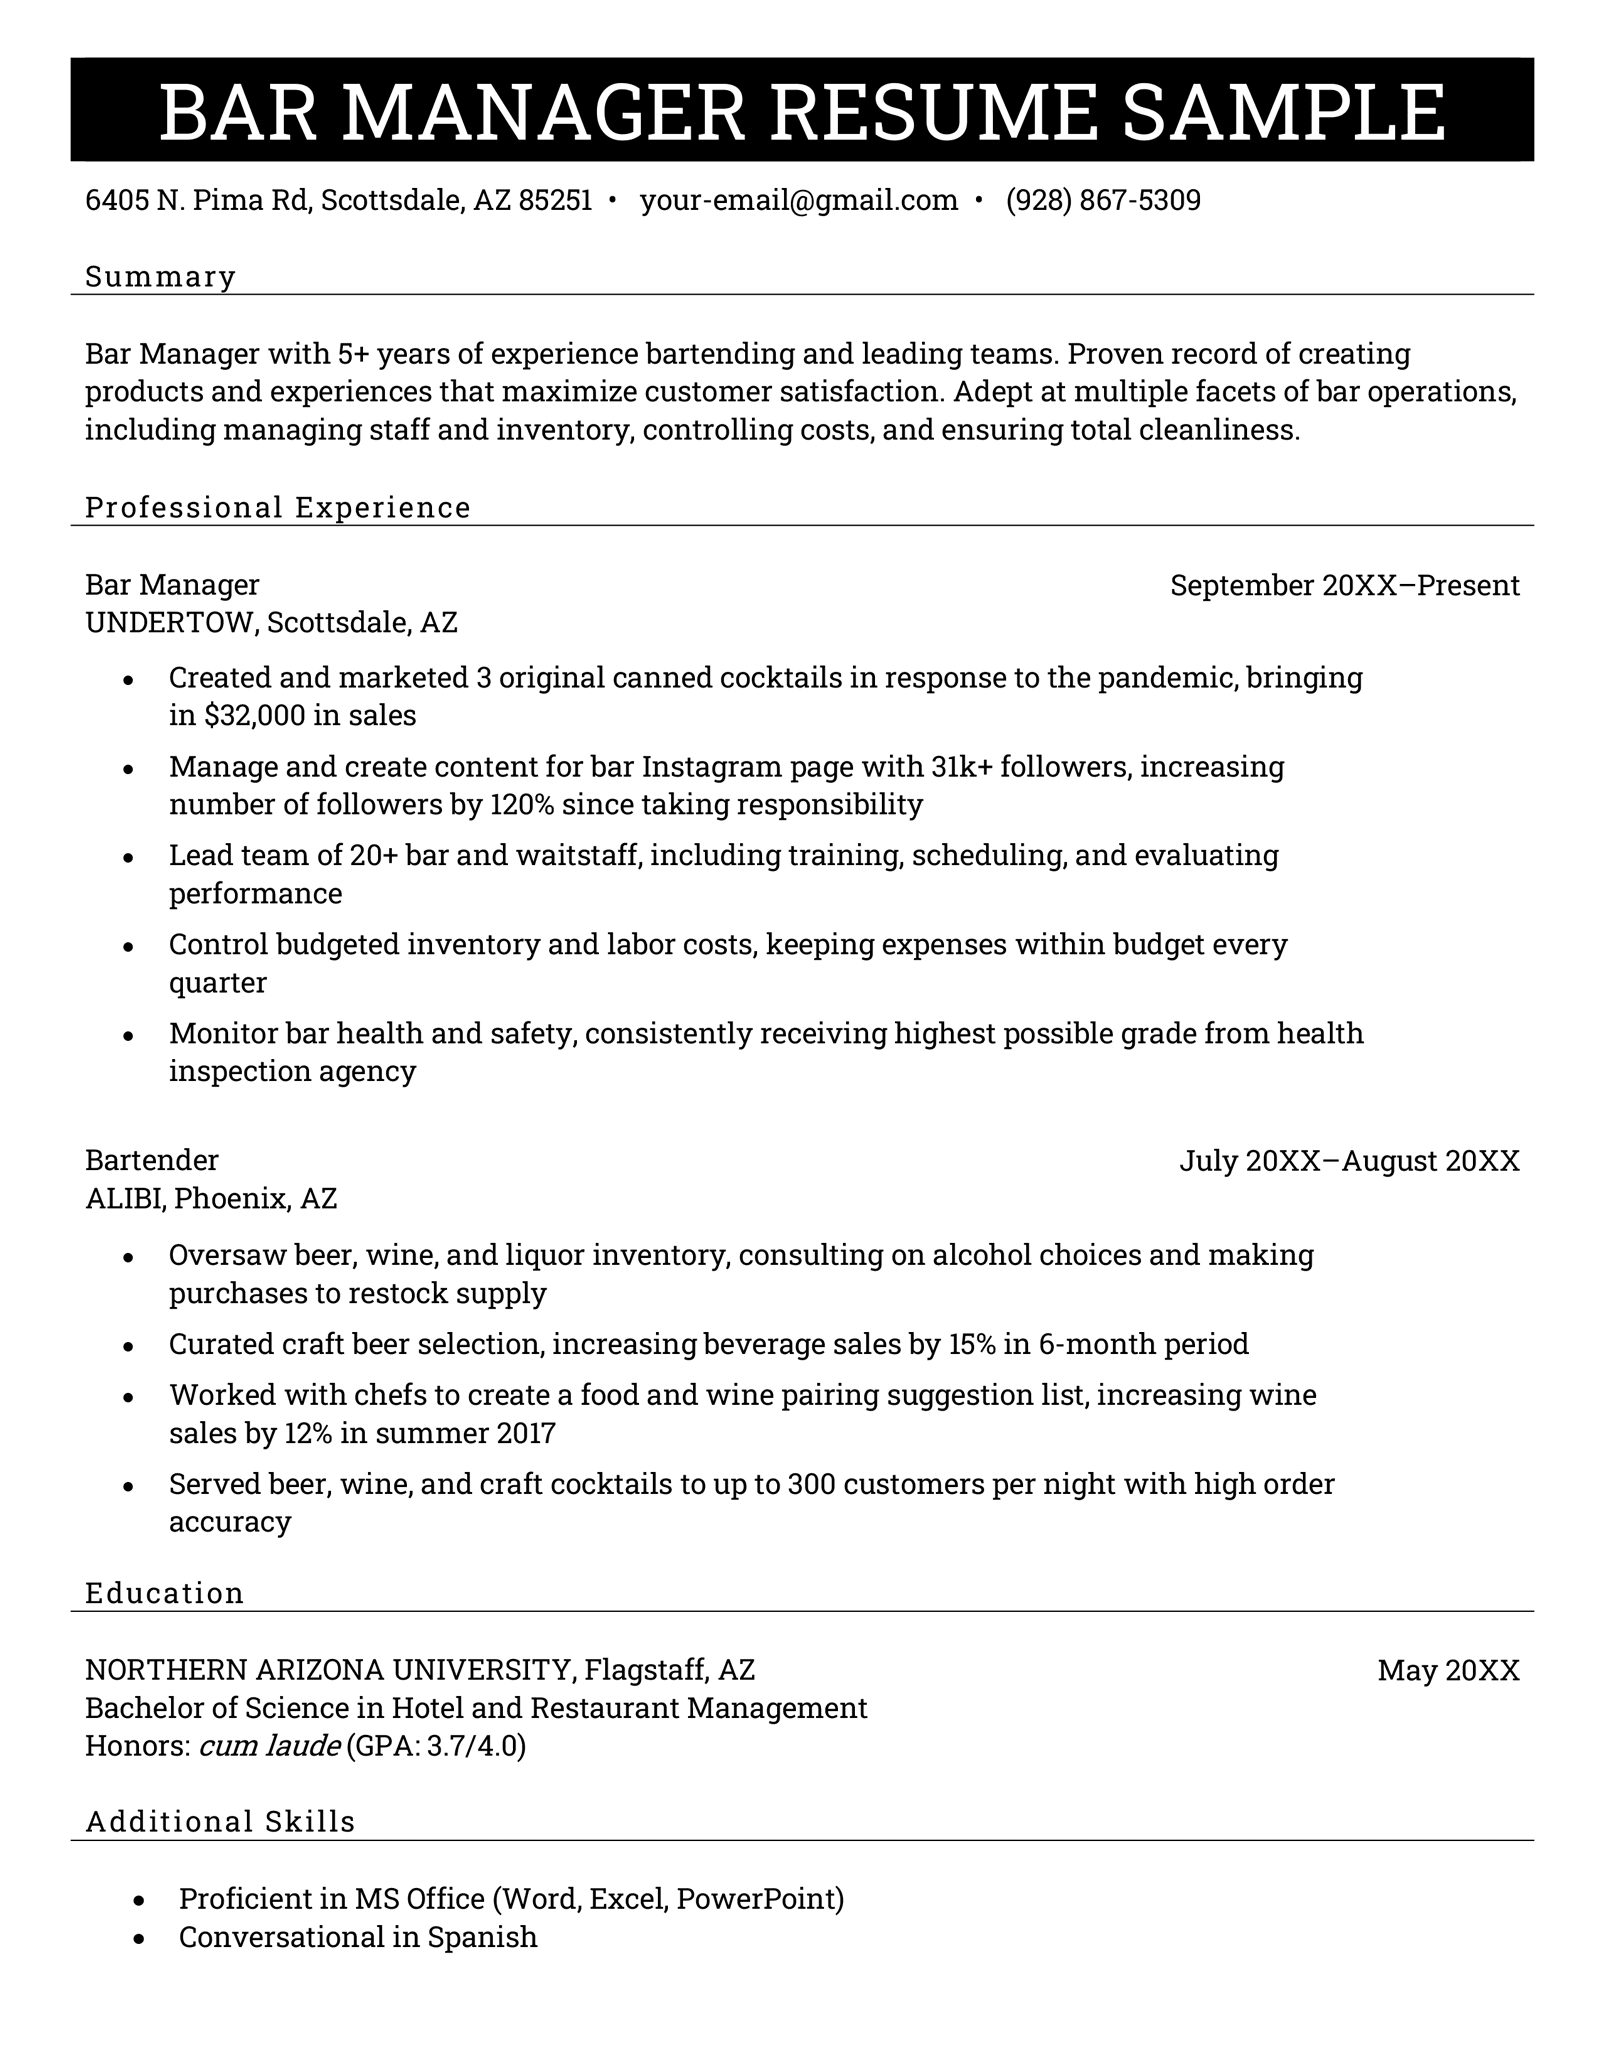 A bar manager resume sample with a black bar for the applicant's name at the top followed by contact information, a resume summary, professional experience, education, and additional skills